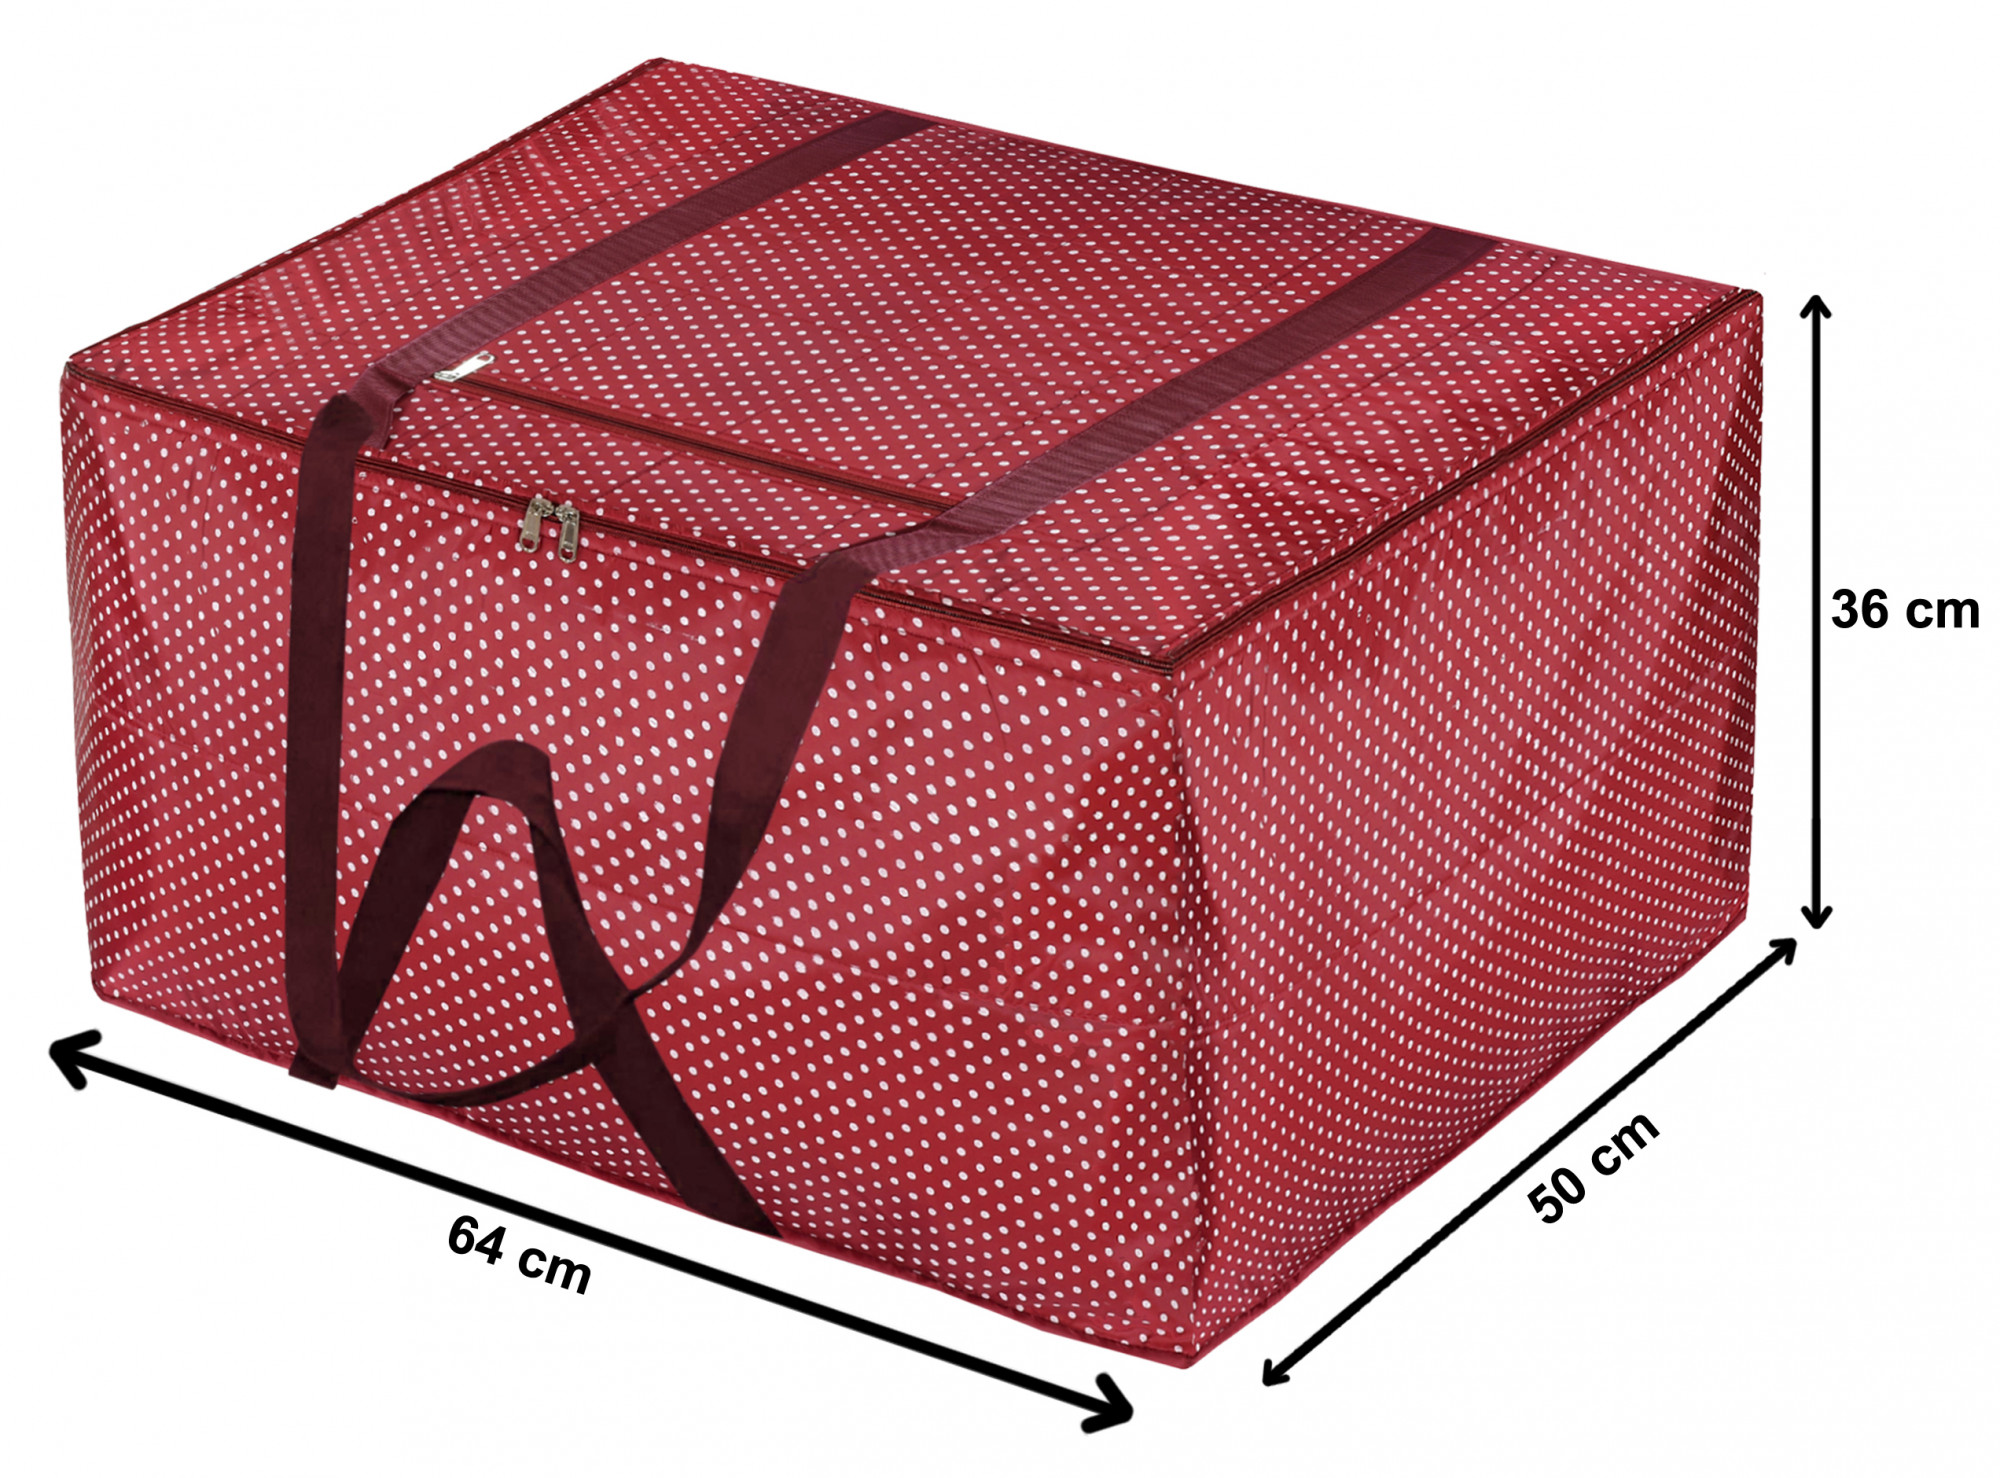 Kuber Industries Dot Printed Large Size Lightweight Foldable Parachute Jumbo Underbed Storage Bag With Zipper And Handle (Maroon)